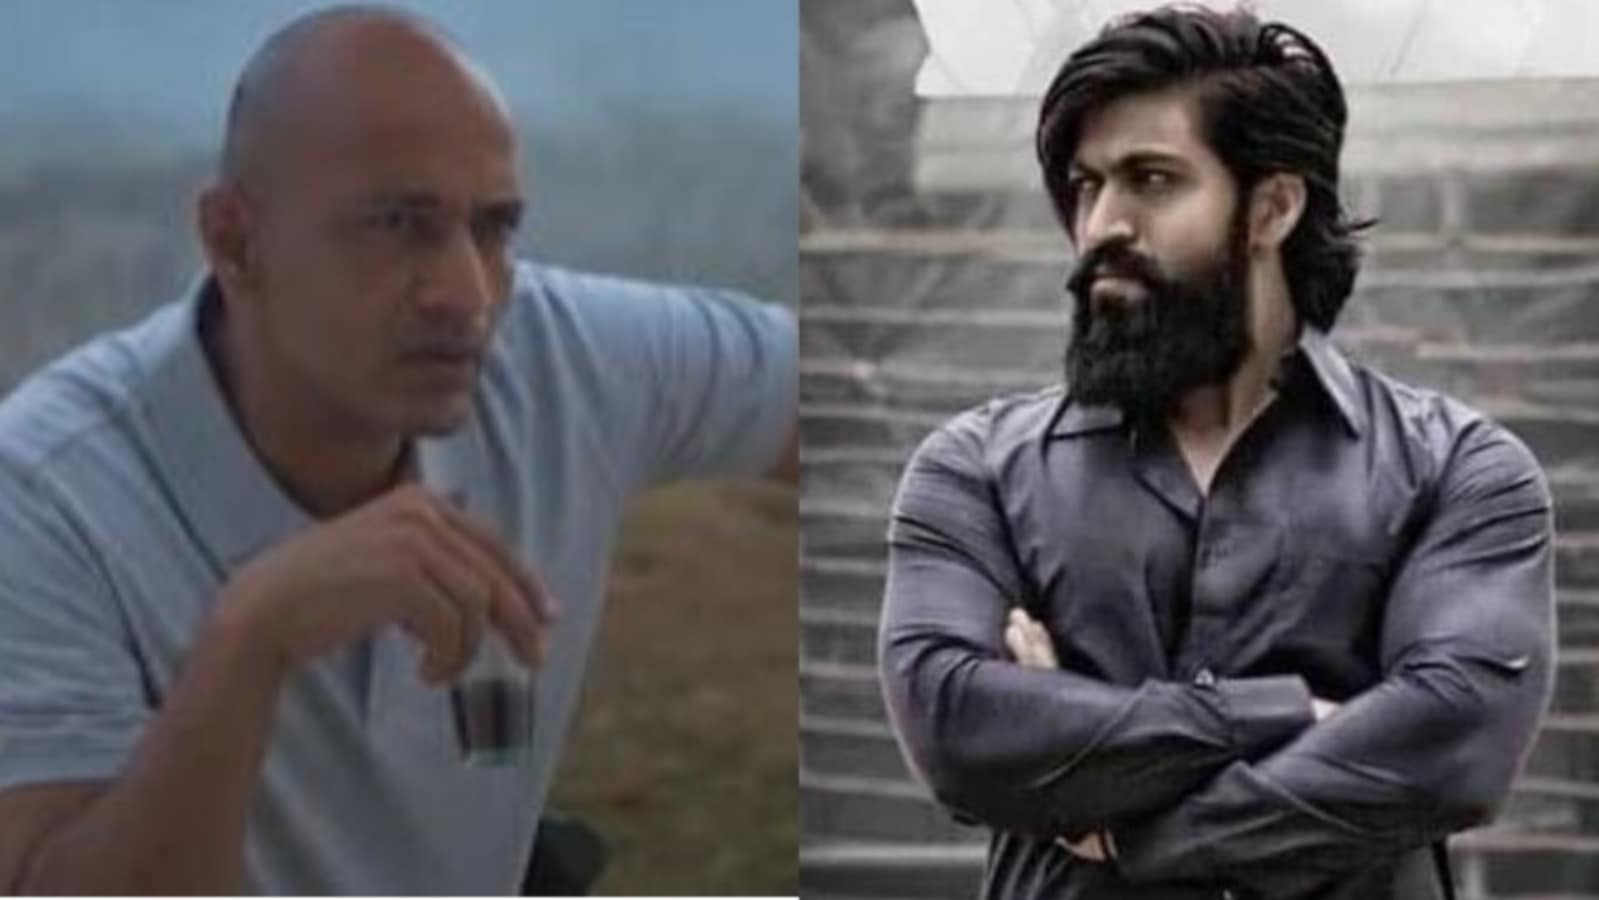 Kantara’s Kishore says Yash’s KGF 2 isn’t his ‘type of cinema’: ‘I’d rather watch a small film than something mindless’